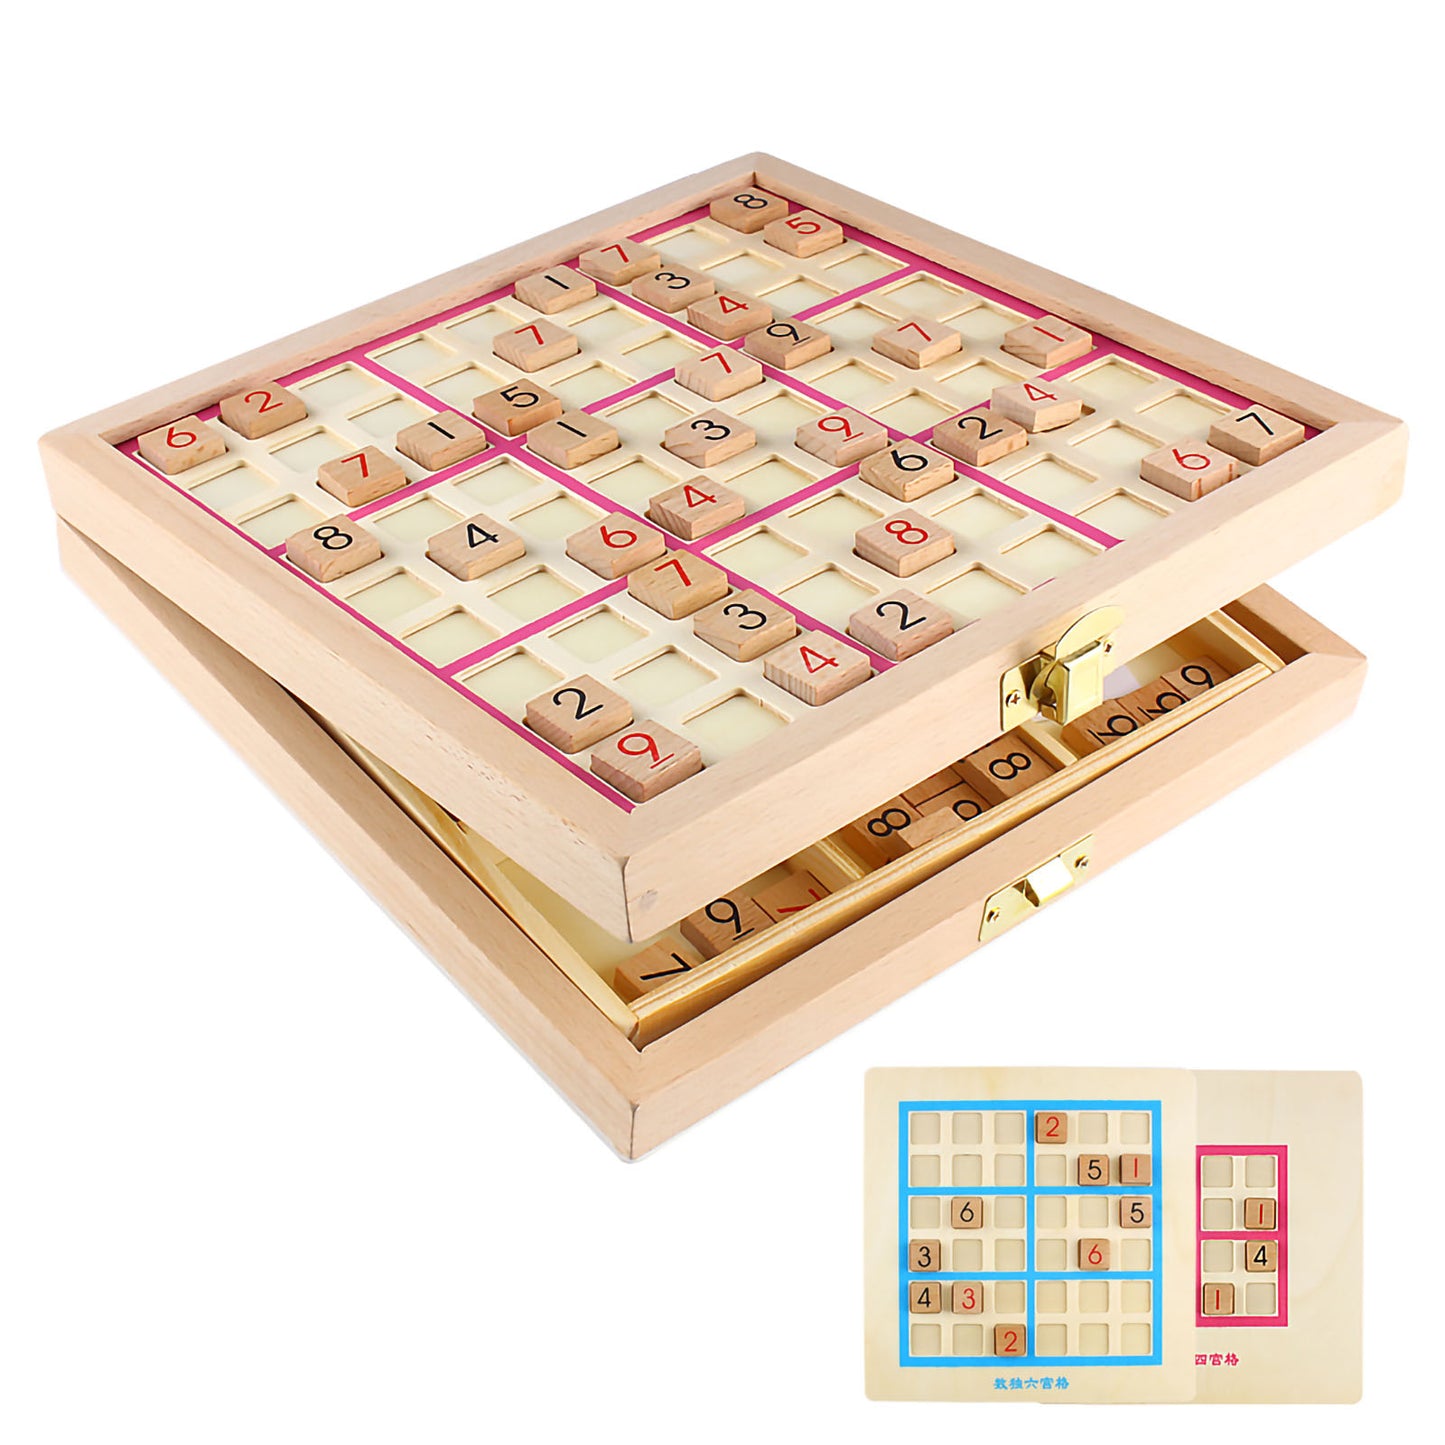 Andux Sudoku Board Box 3-in-1 Toy SD-03 (Pink)